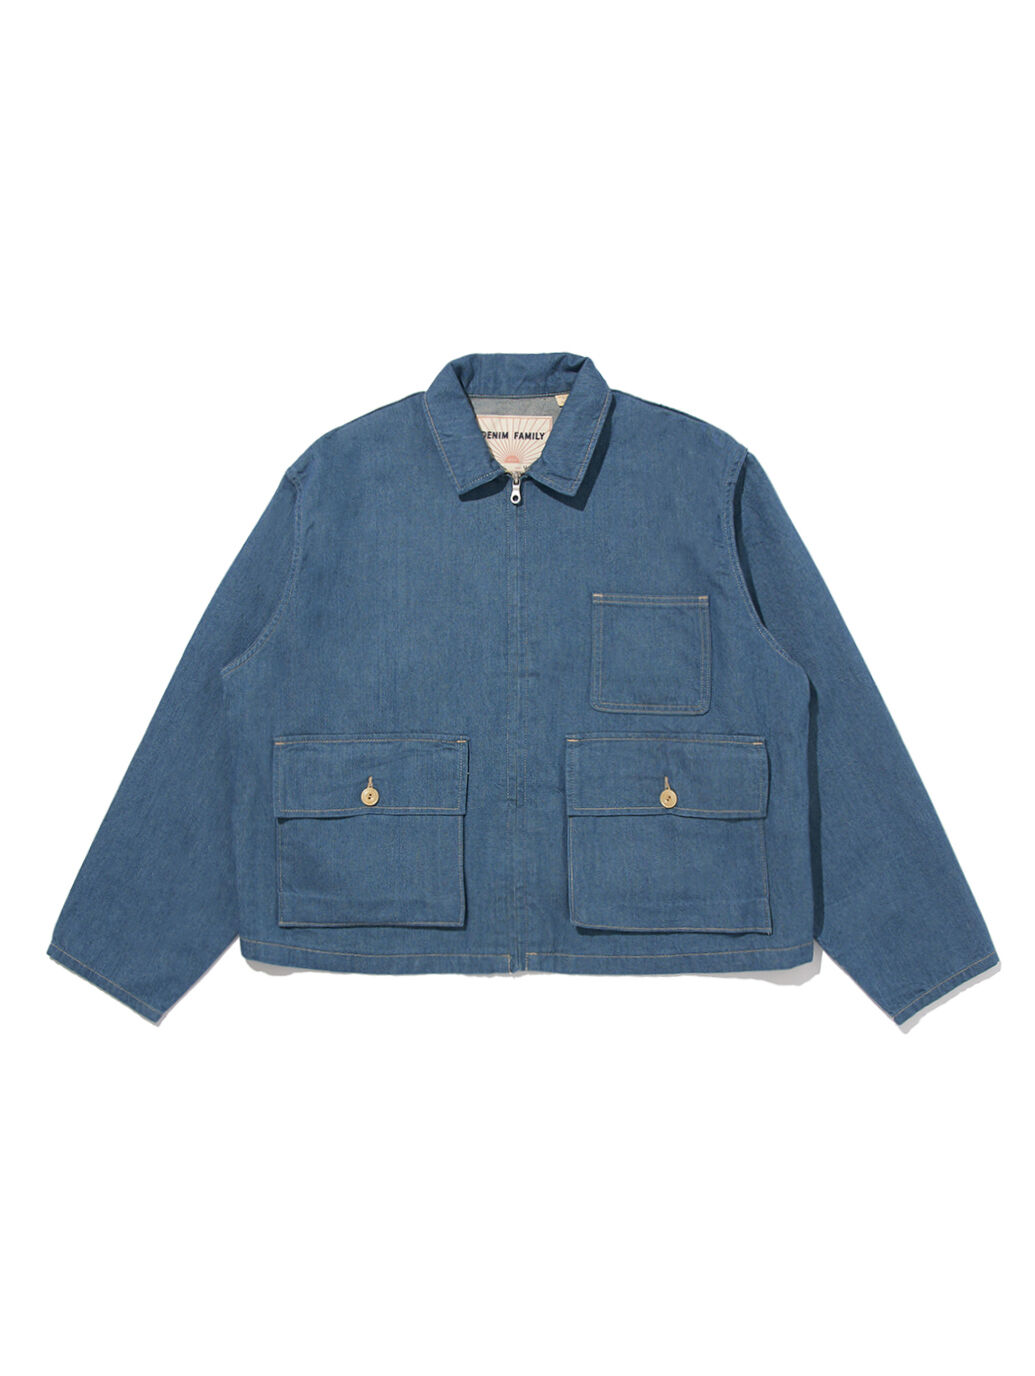 LEVI'S® MADE&CRAFTED® DENIM FAMILY クロップドジャケット SPRING 